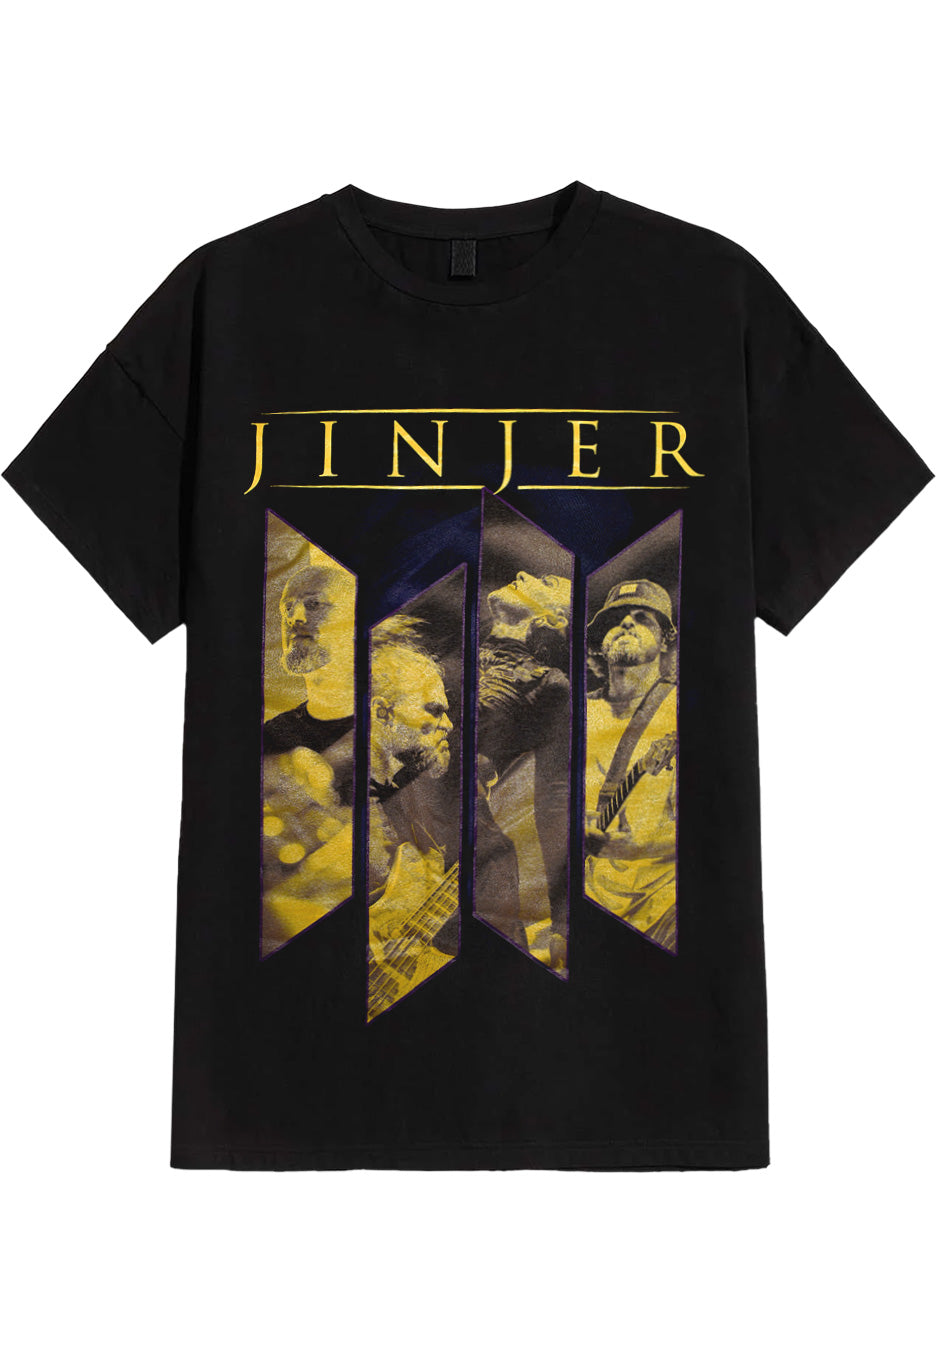 Jinjer - Live In Los Angeles - T-Shirt | Neutral-Image